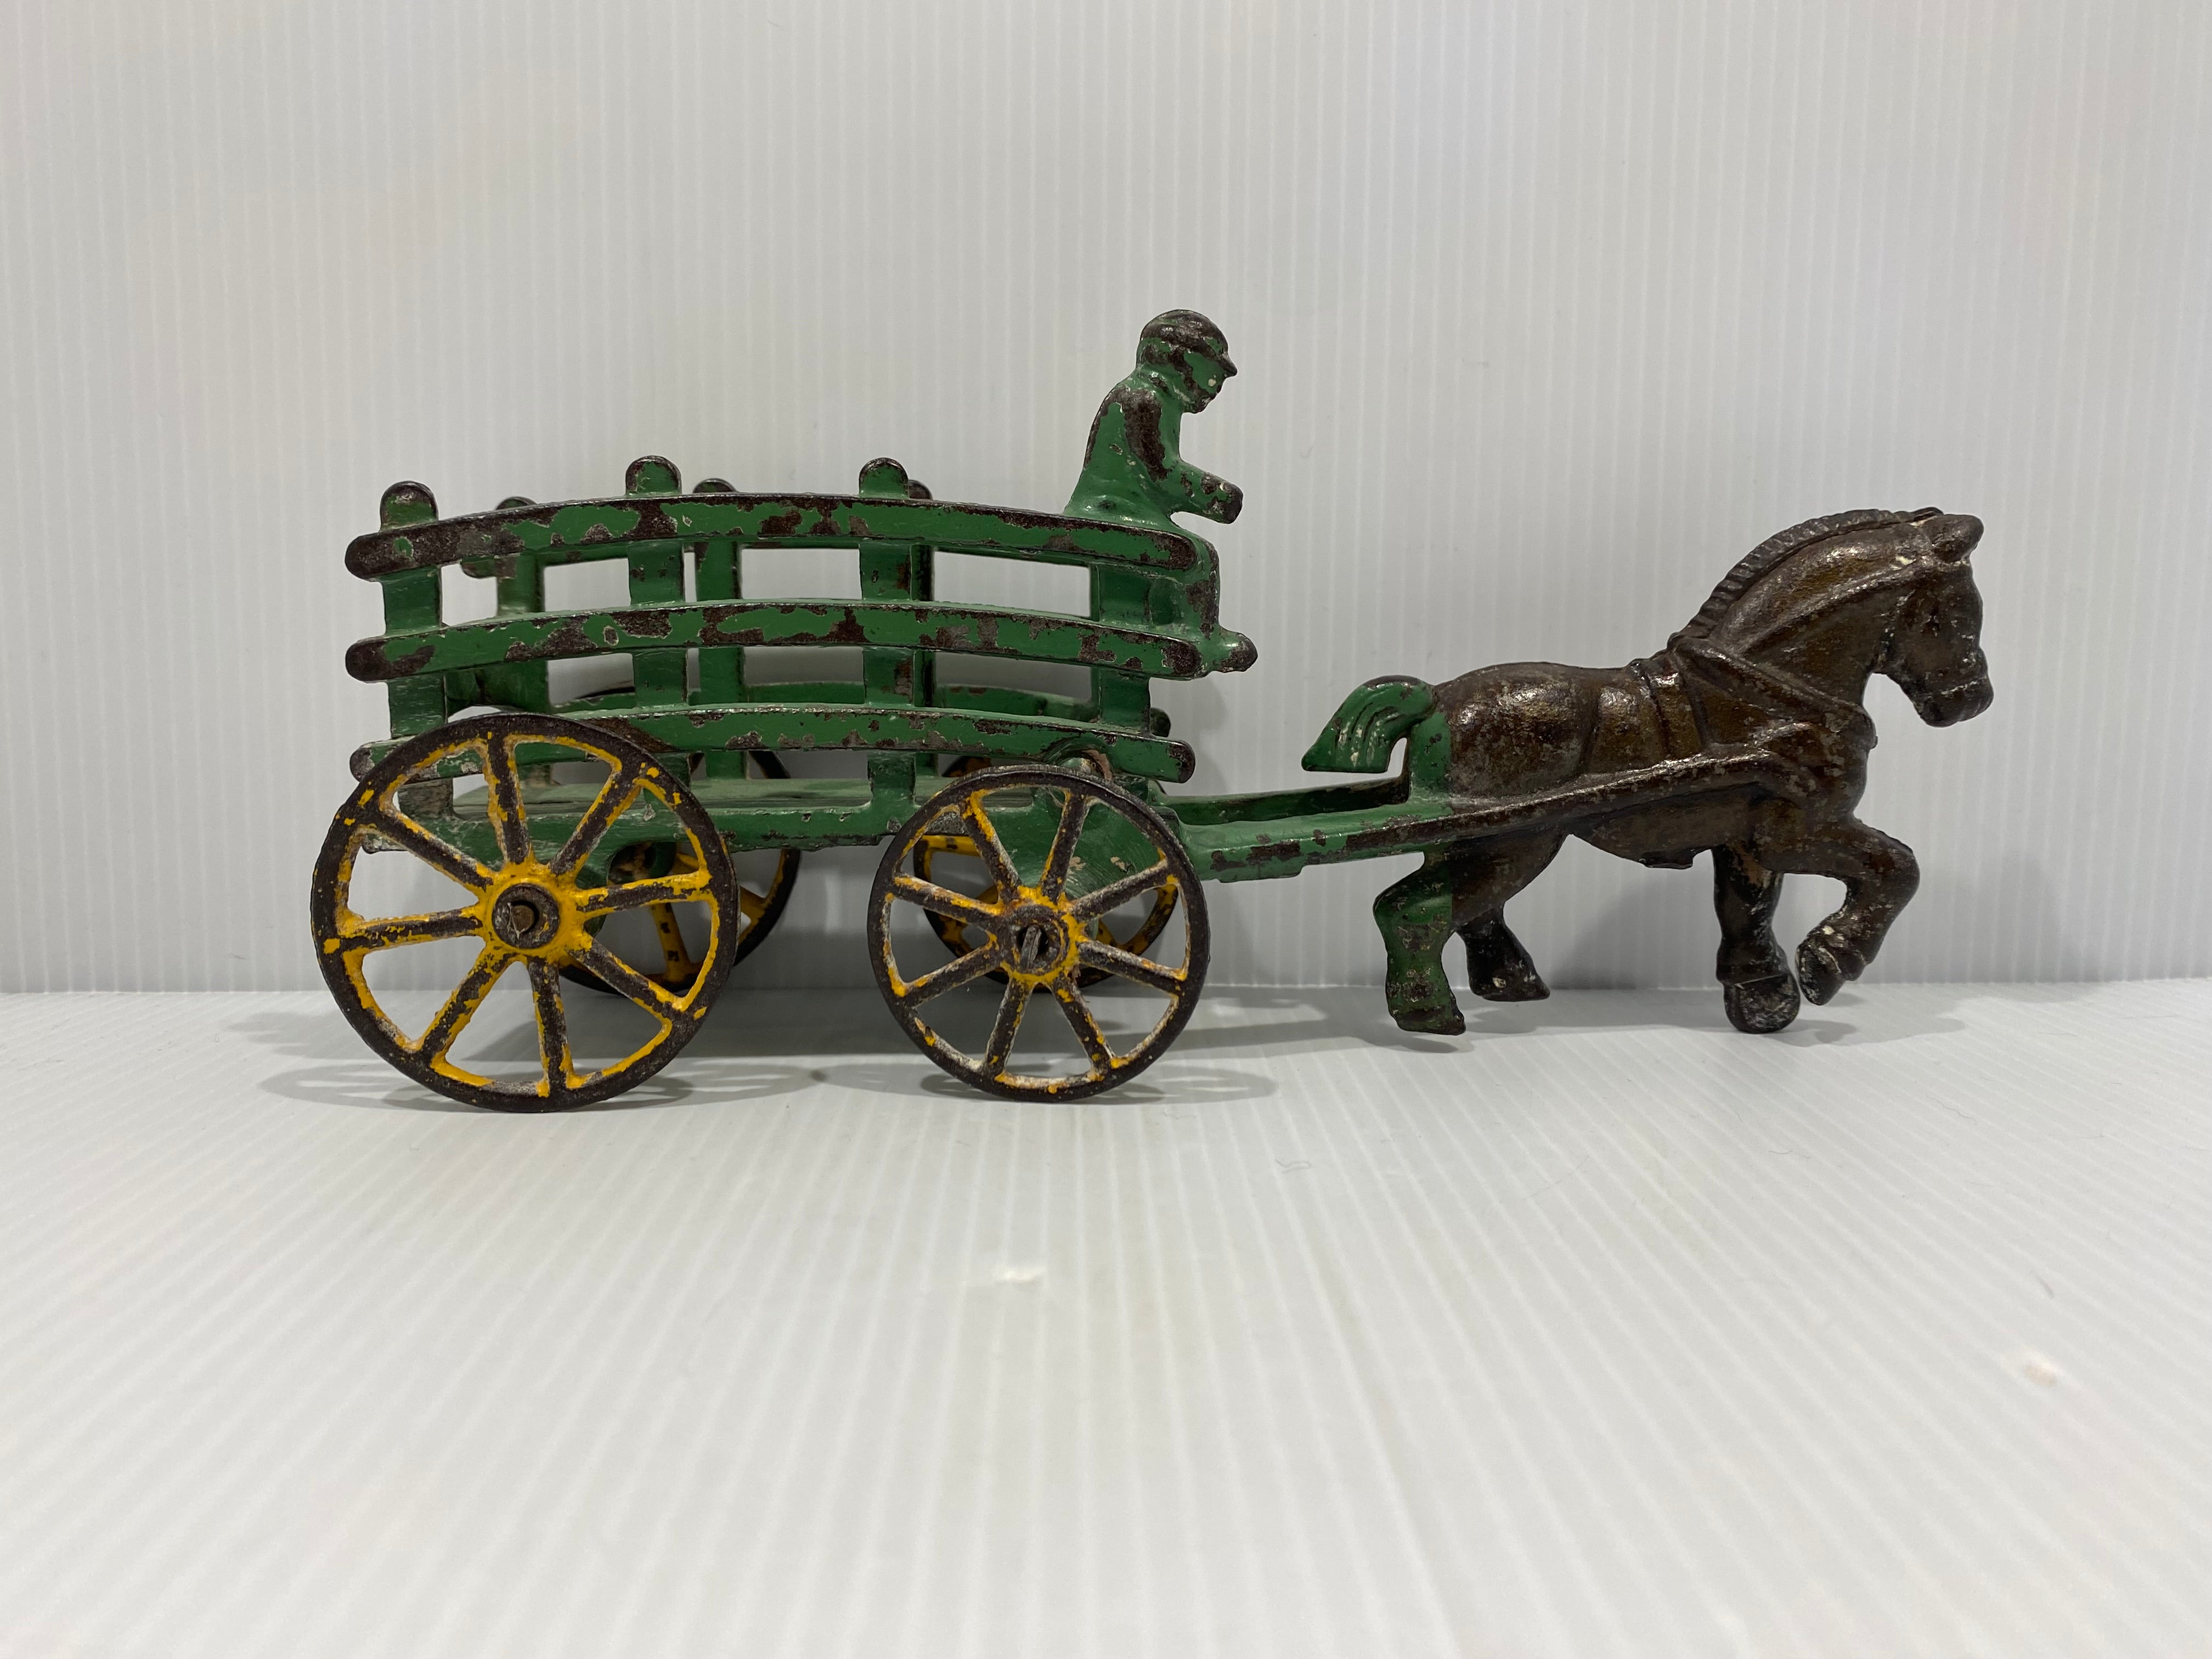 Original Green, stake wagons with cast in drivers. No cracks or repairs.